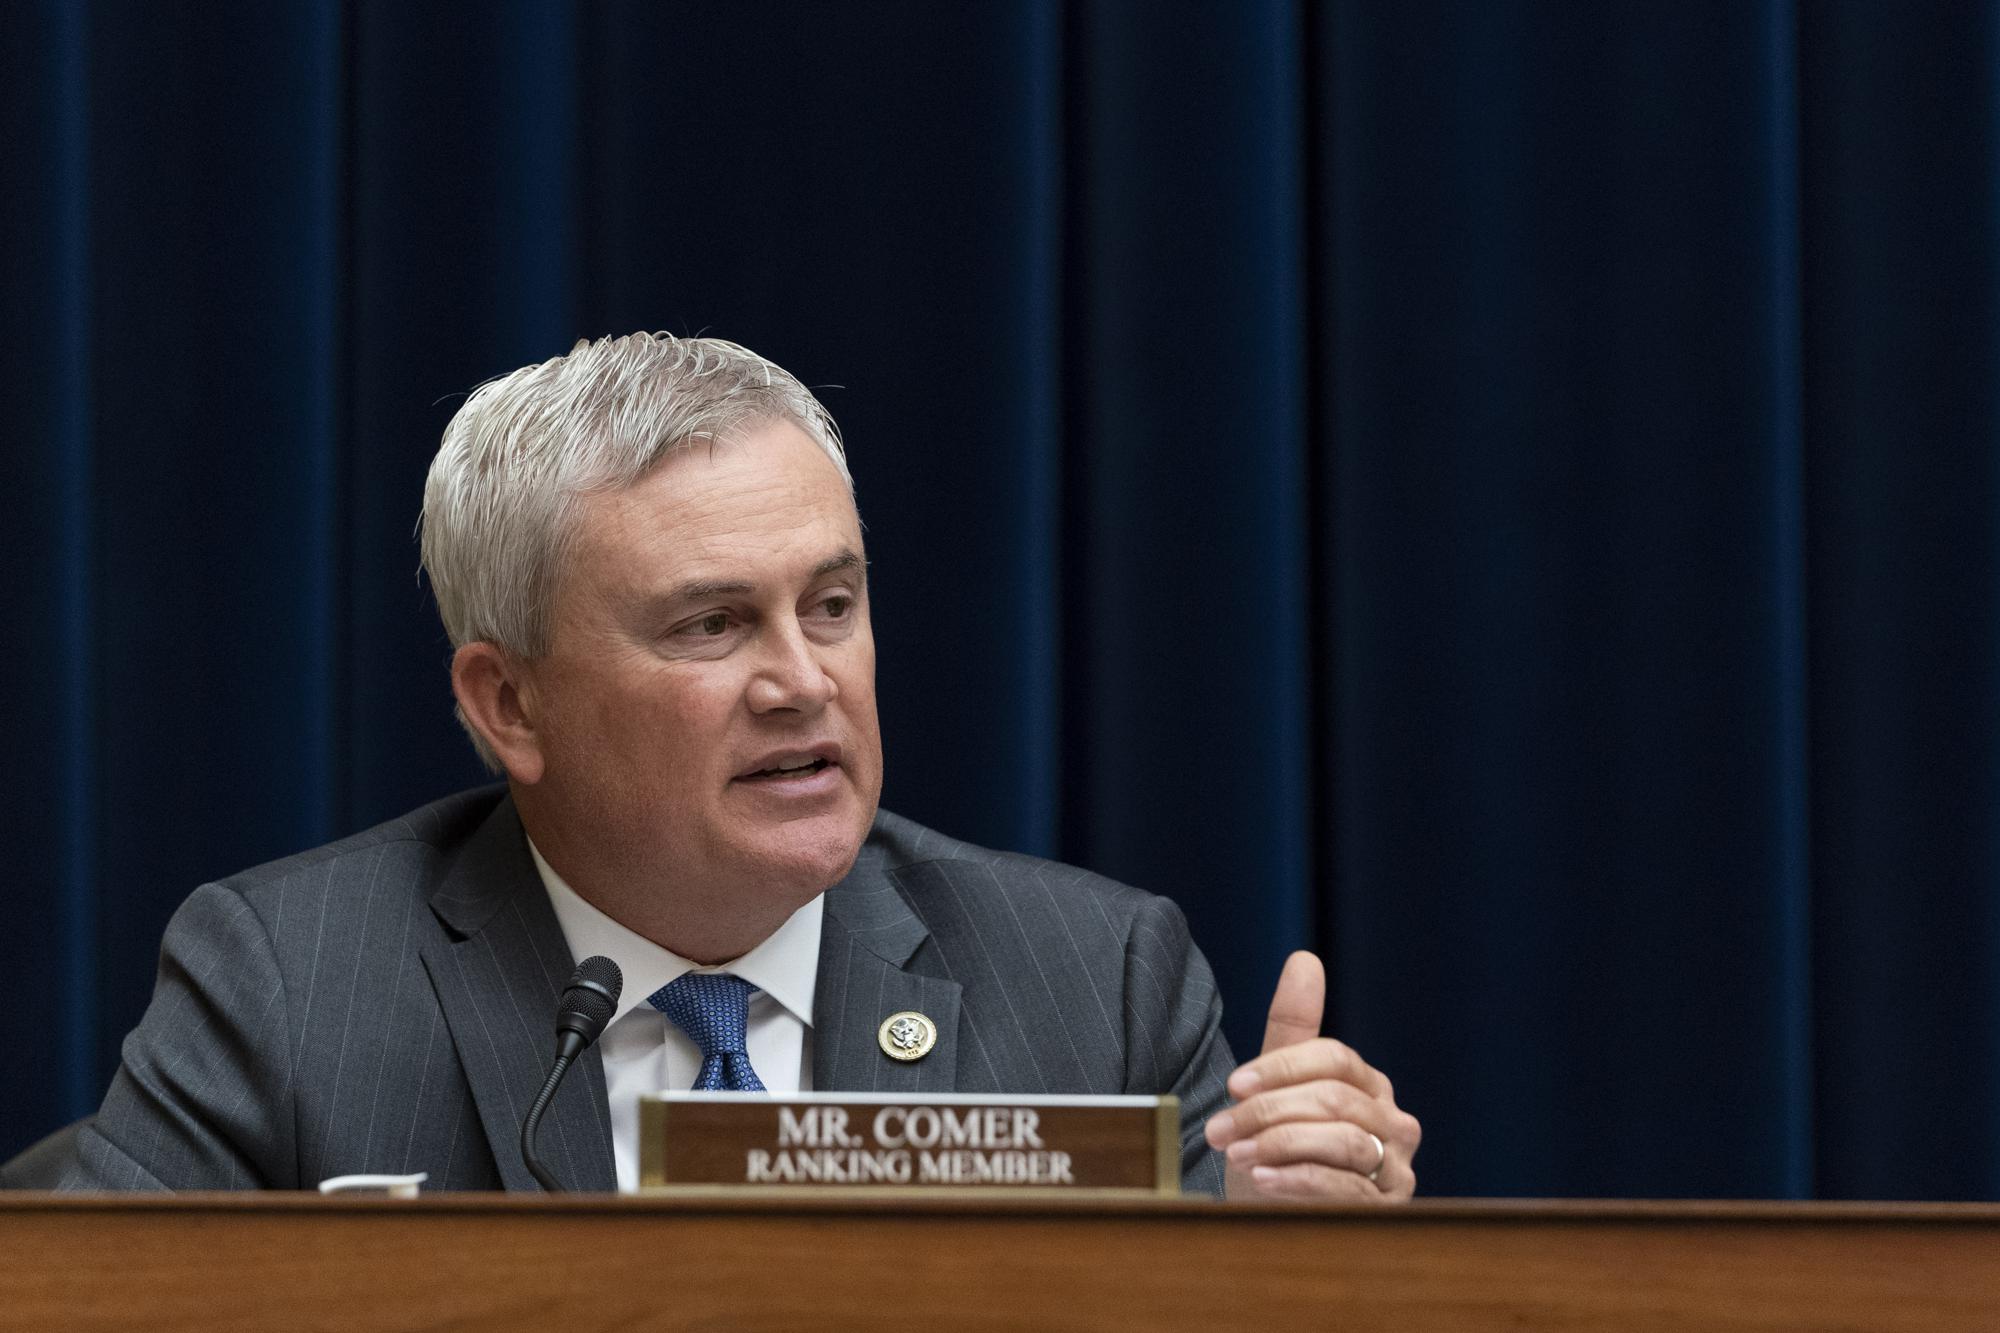 FILE - In this Thursday July 29, 2021 file photo, House Committee on Oversight and Reform committee Ranking Member Rep. James Comer, R-Ky., speaks during a hearing on voting rights in Texas in Washington. On Thursday, Aug. 5, 2021, Comer said he currently has no plans to run for Kentucky governor in 2023, saying his sights are on another prize — the chairmanship of a key congressional committee. (AP Photo/Jacquelyn Martin, File)